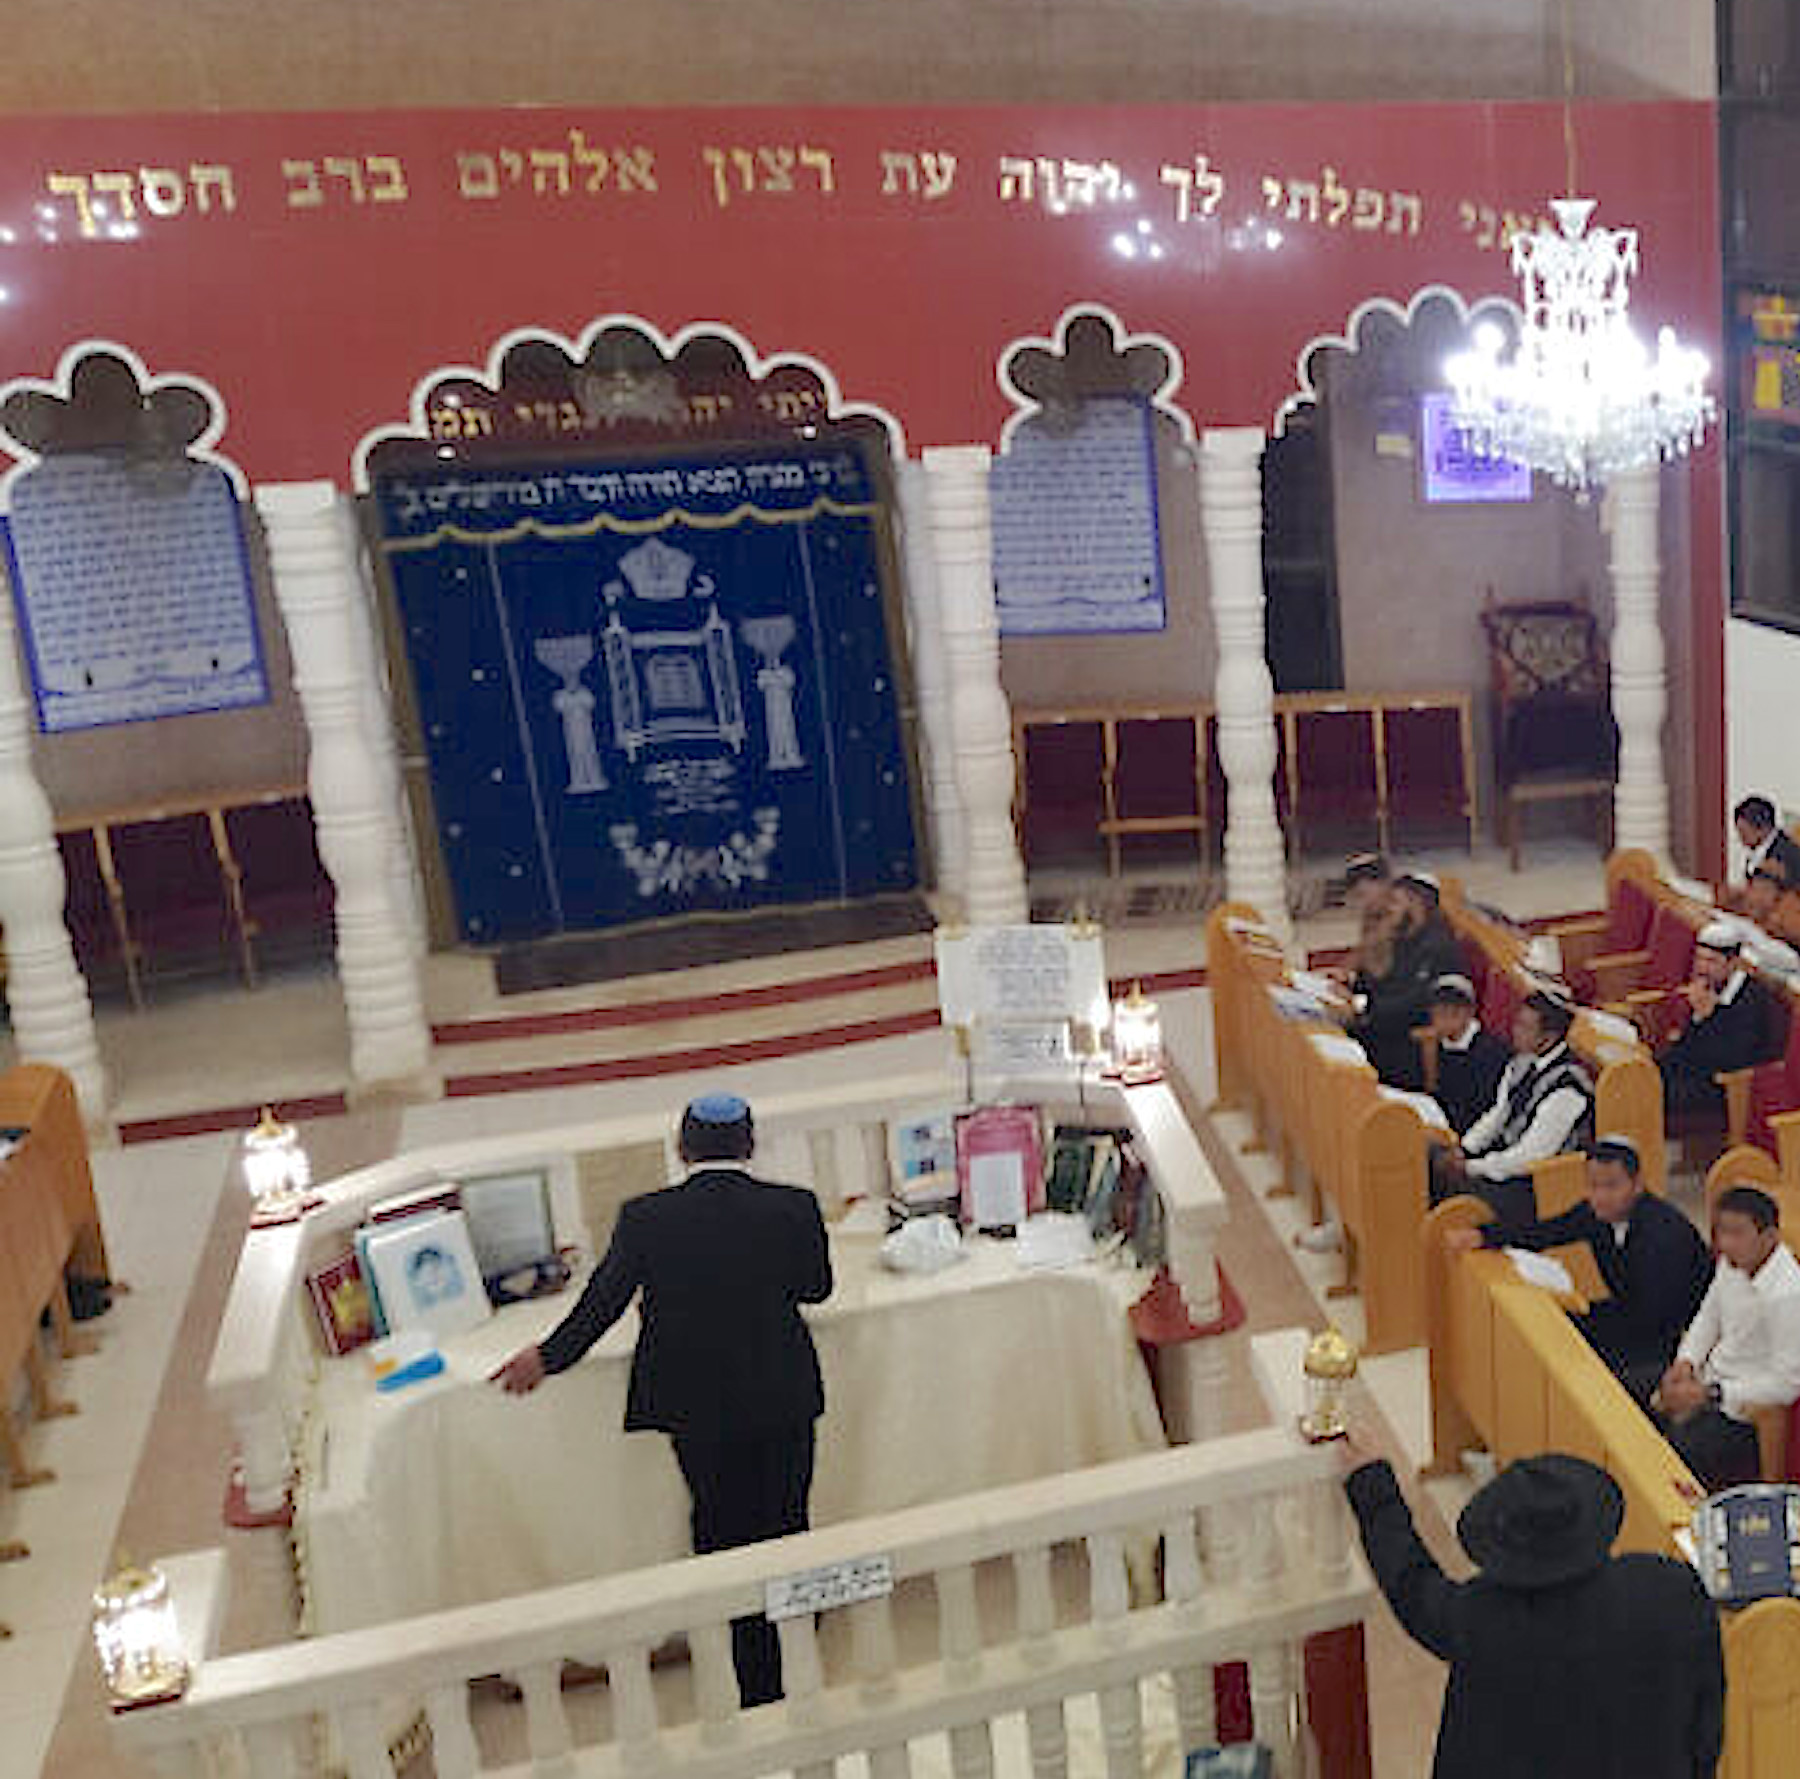 Bnei Menashe inaugurate their first synagogue in Israel